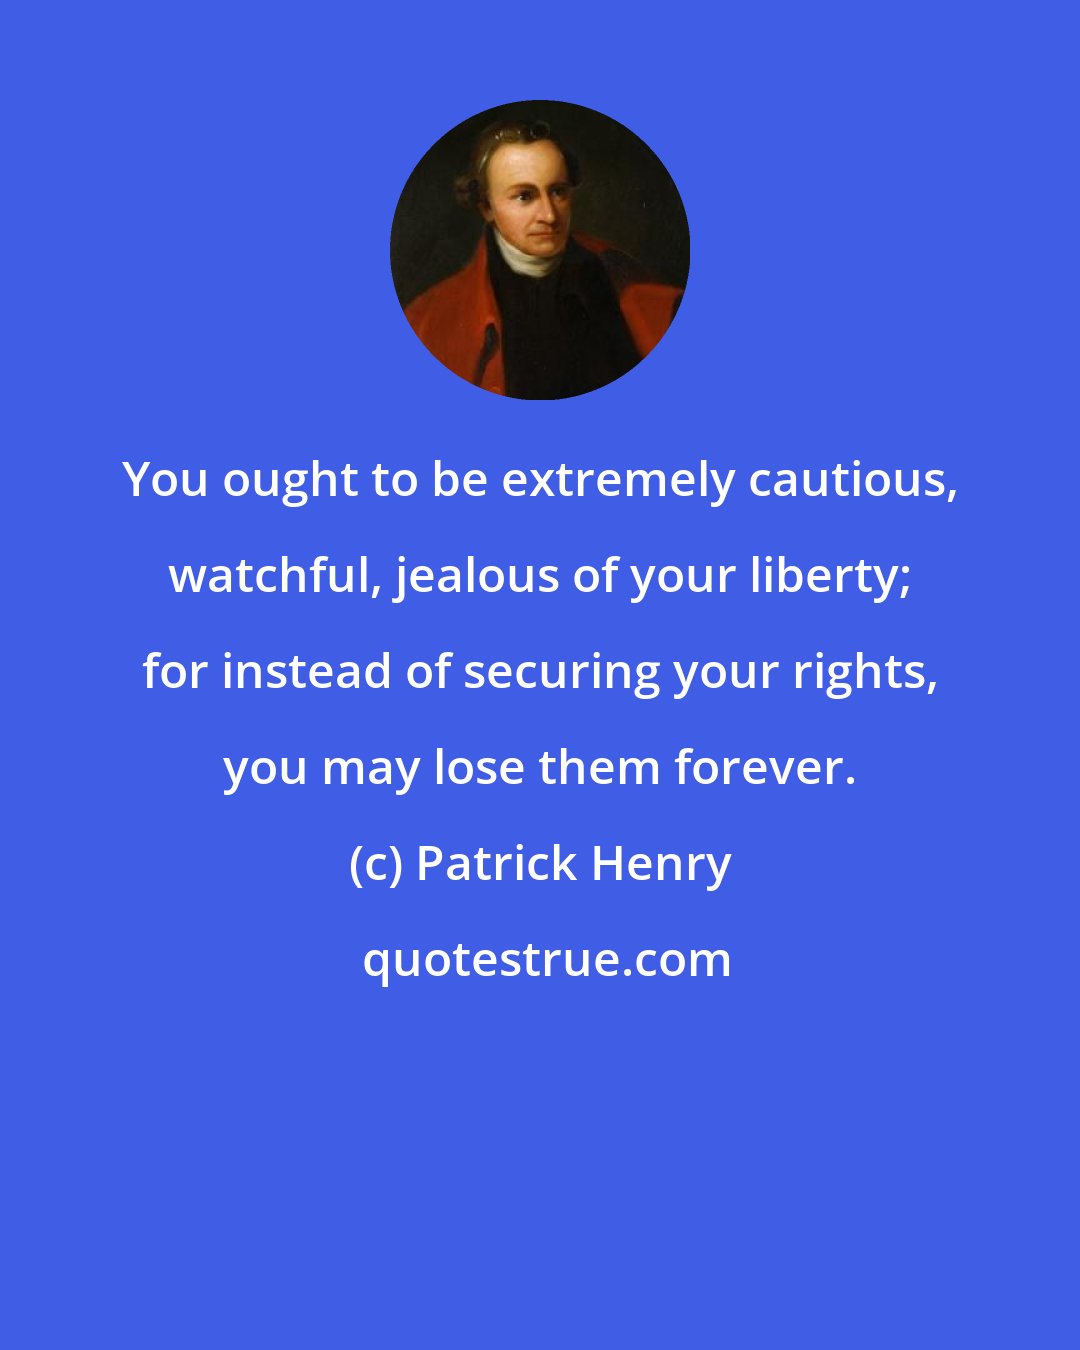 Patrick Henry: You ought to be extremely cautious, watchful, jealous of your liberty; for instead of securing your rights, you may lose them forever.